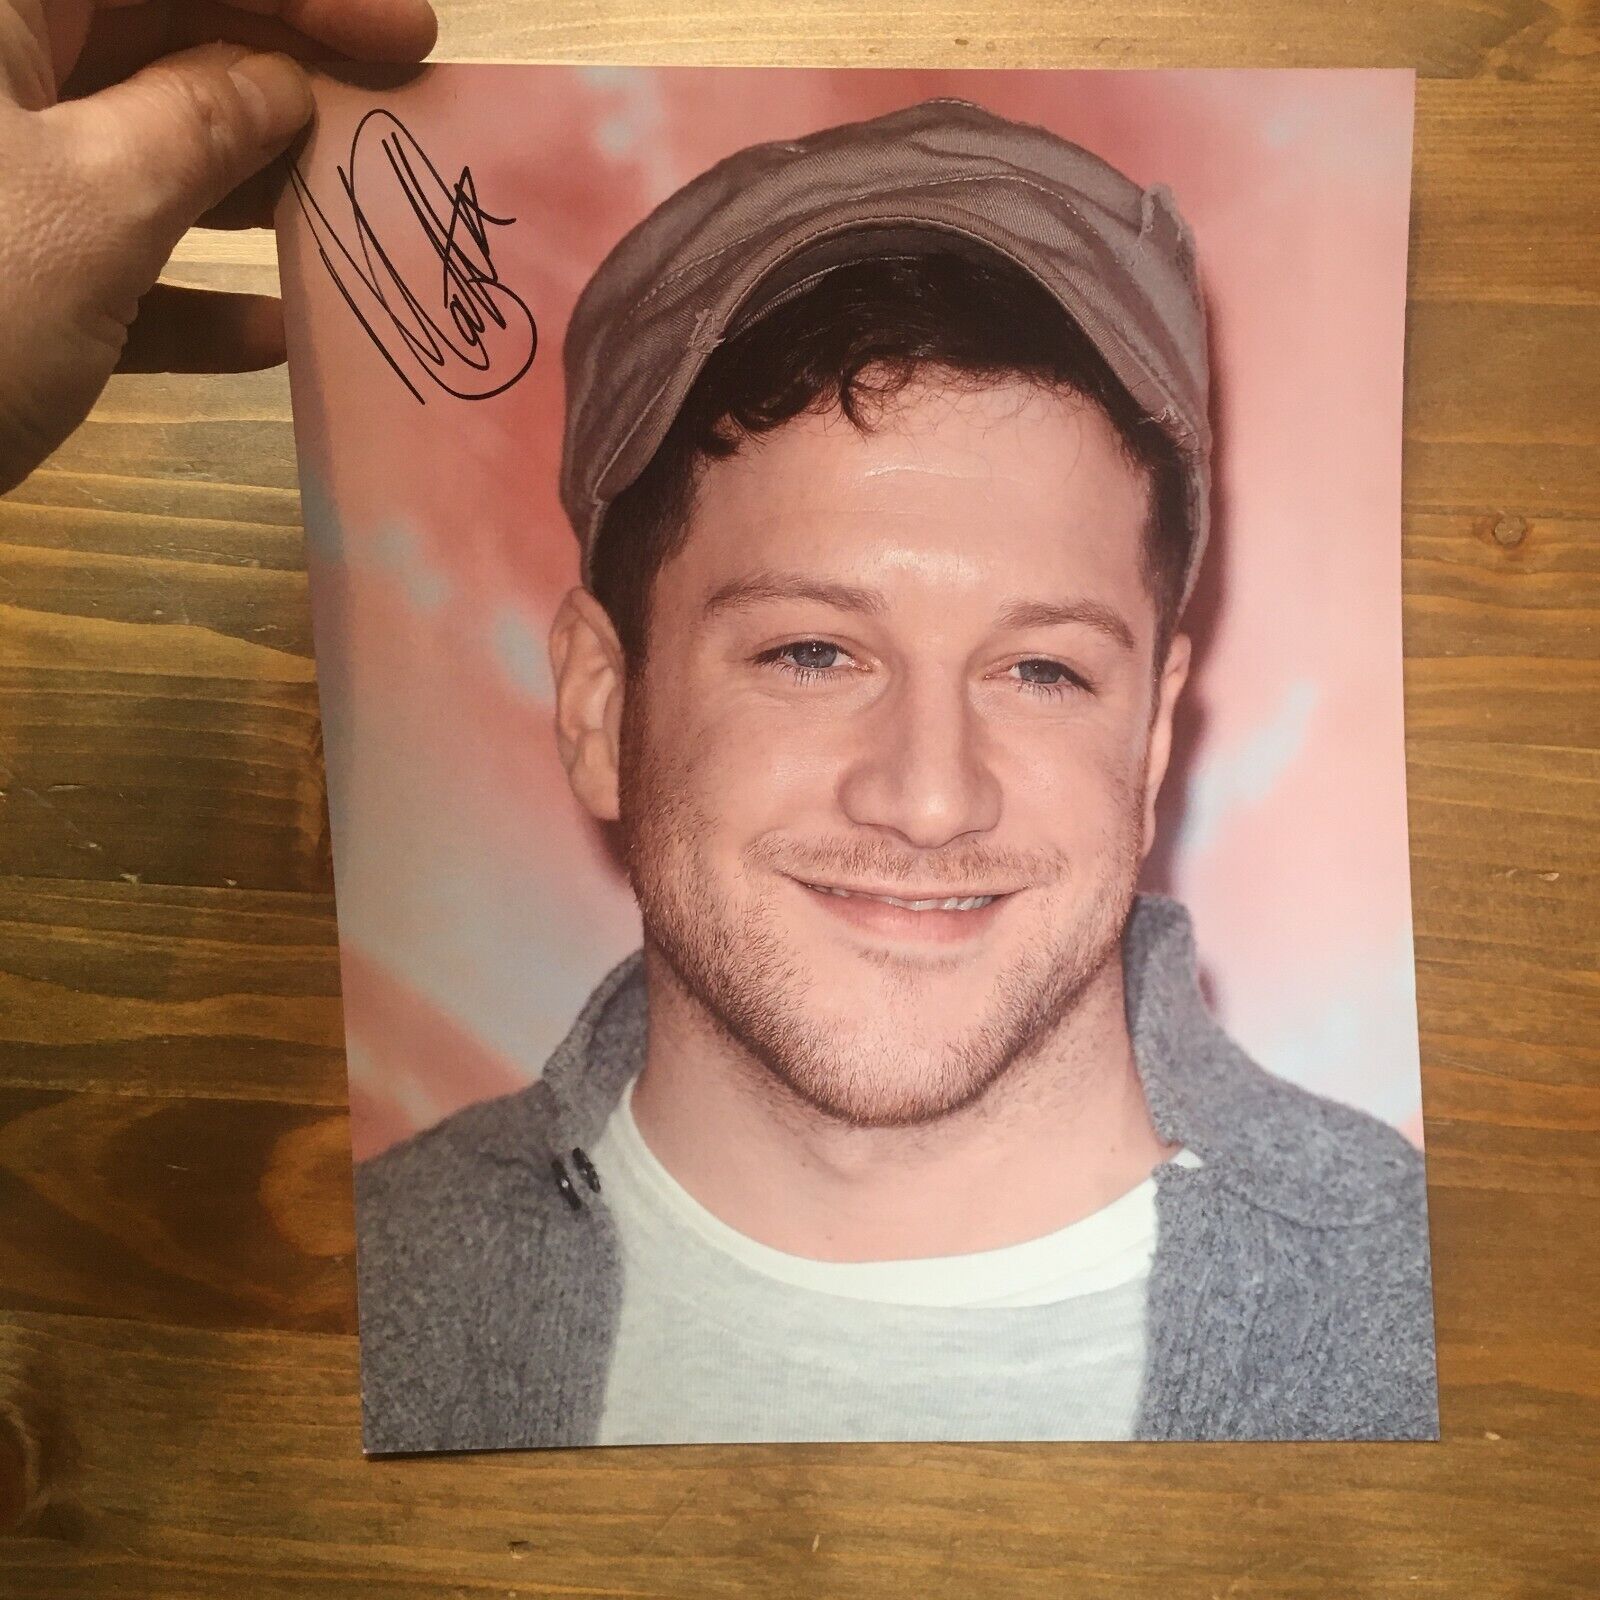 Matt Cardle * HAND SIGNED AUTOGRAPH * on 8x10 inch photo IP Xfactor